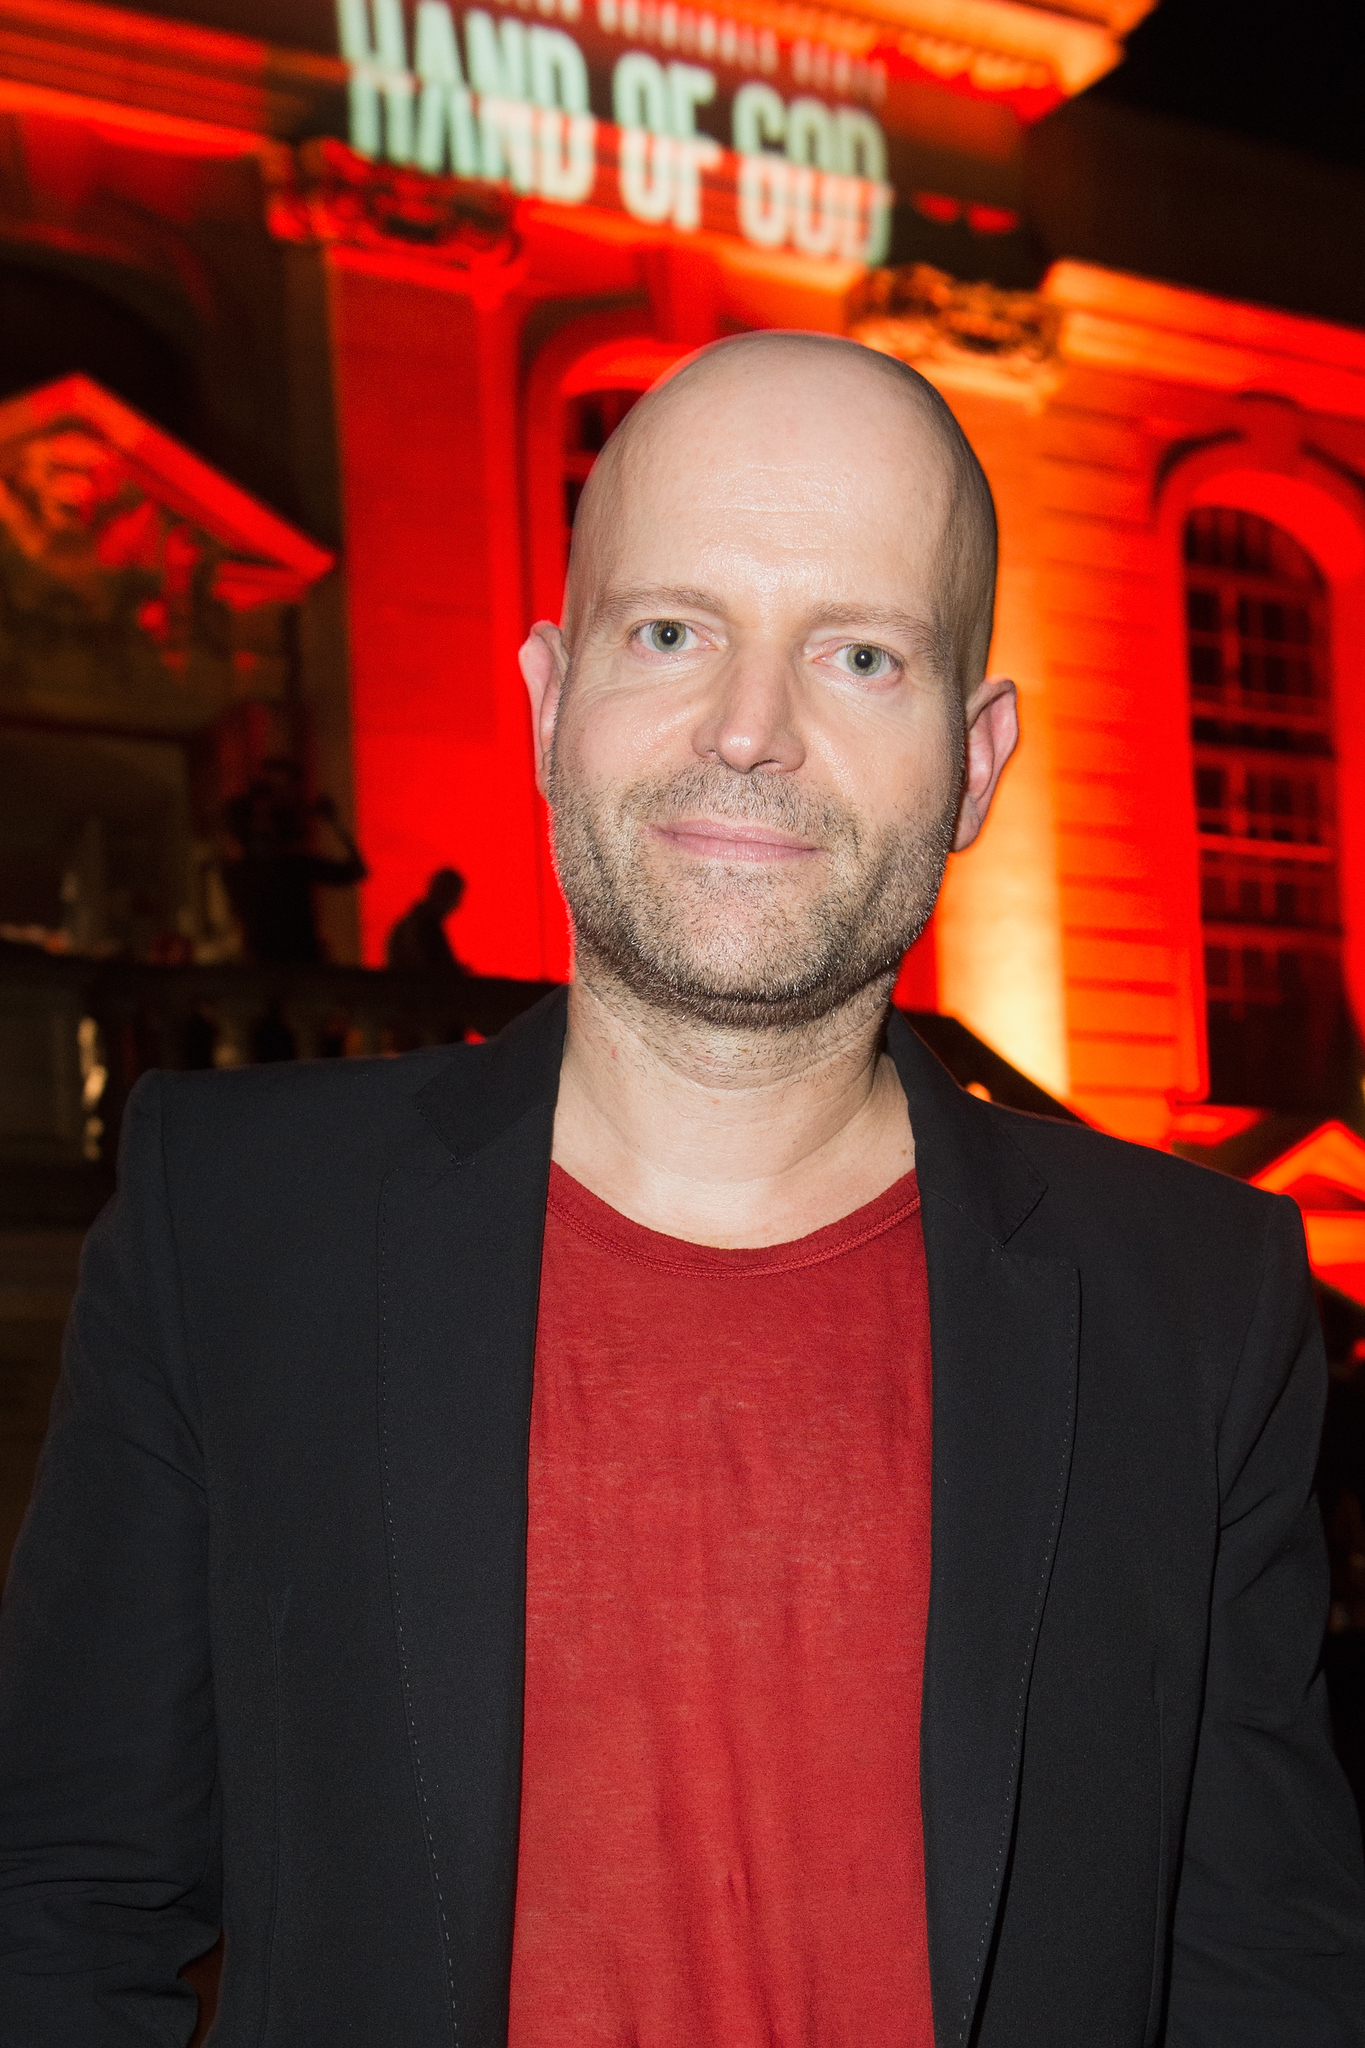 Marc Forster at event of Hand of God (2014)